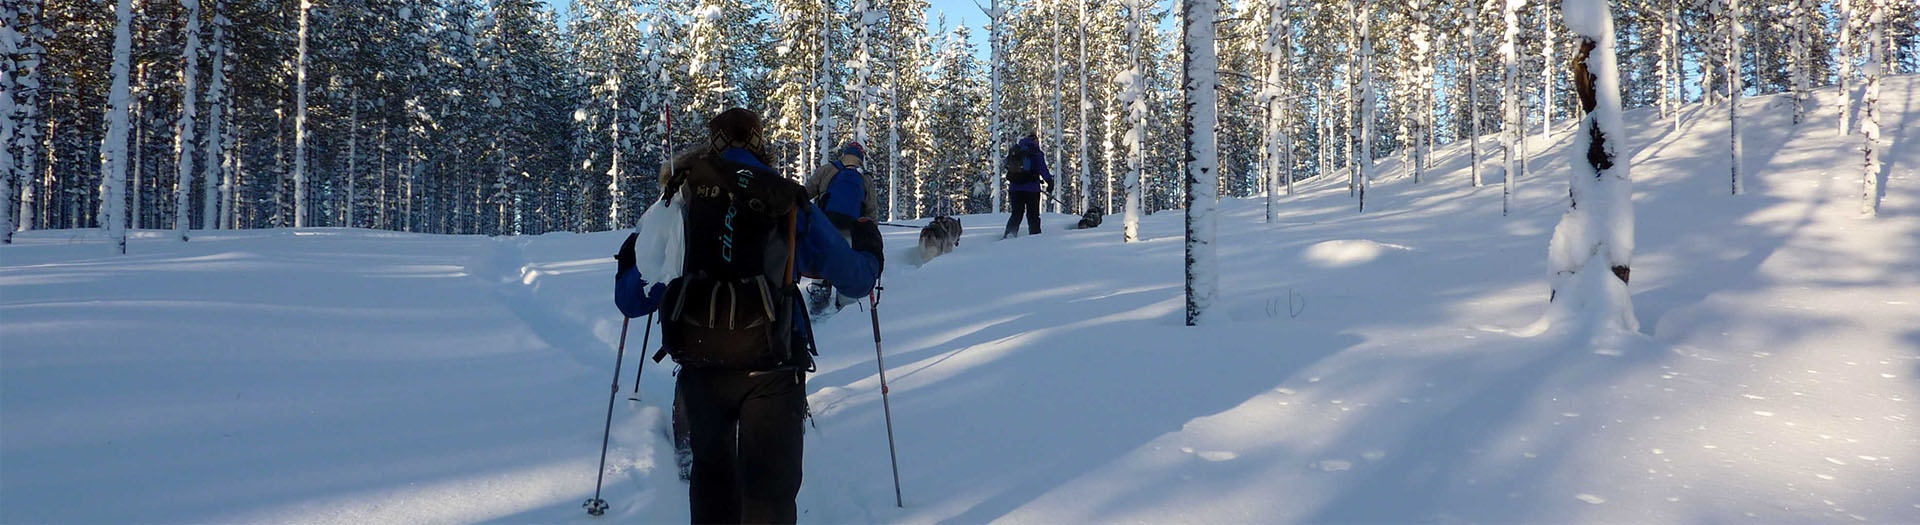 Self-guided nordic skiing adventure